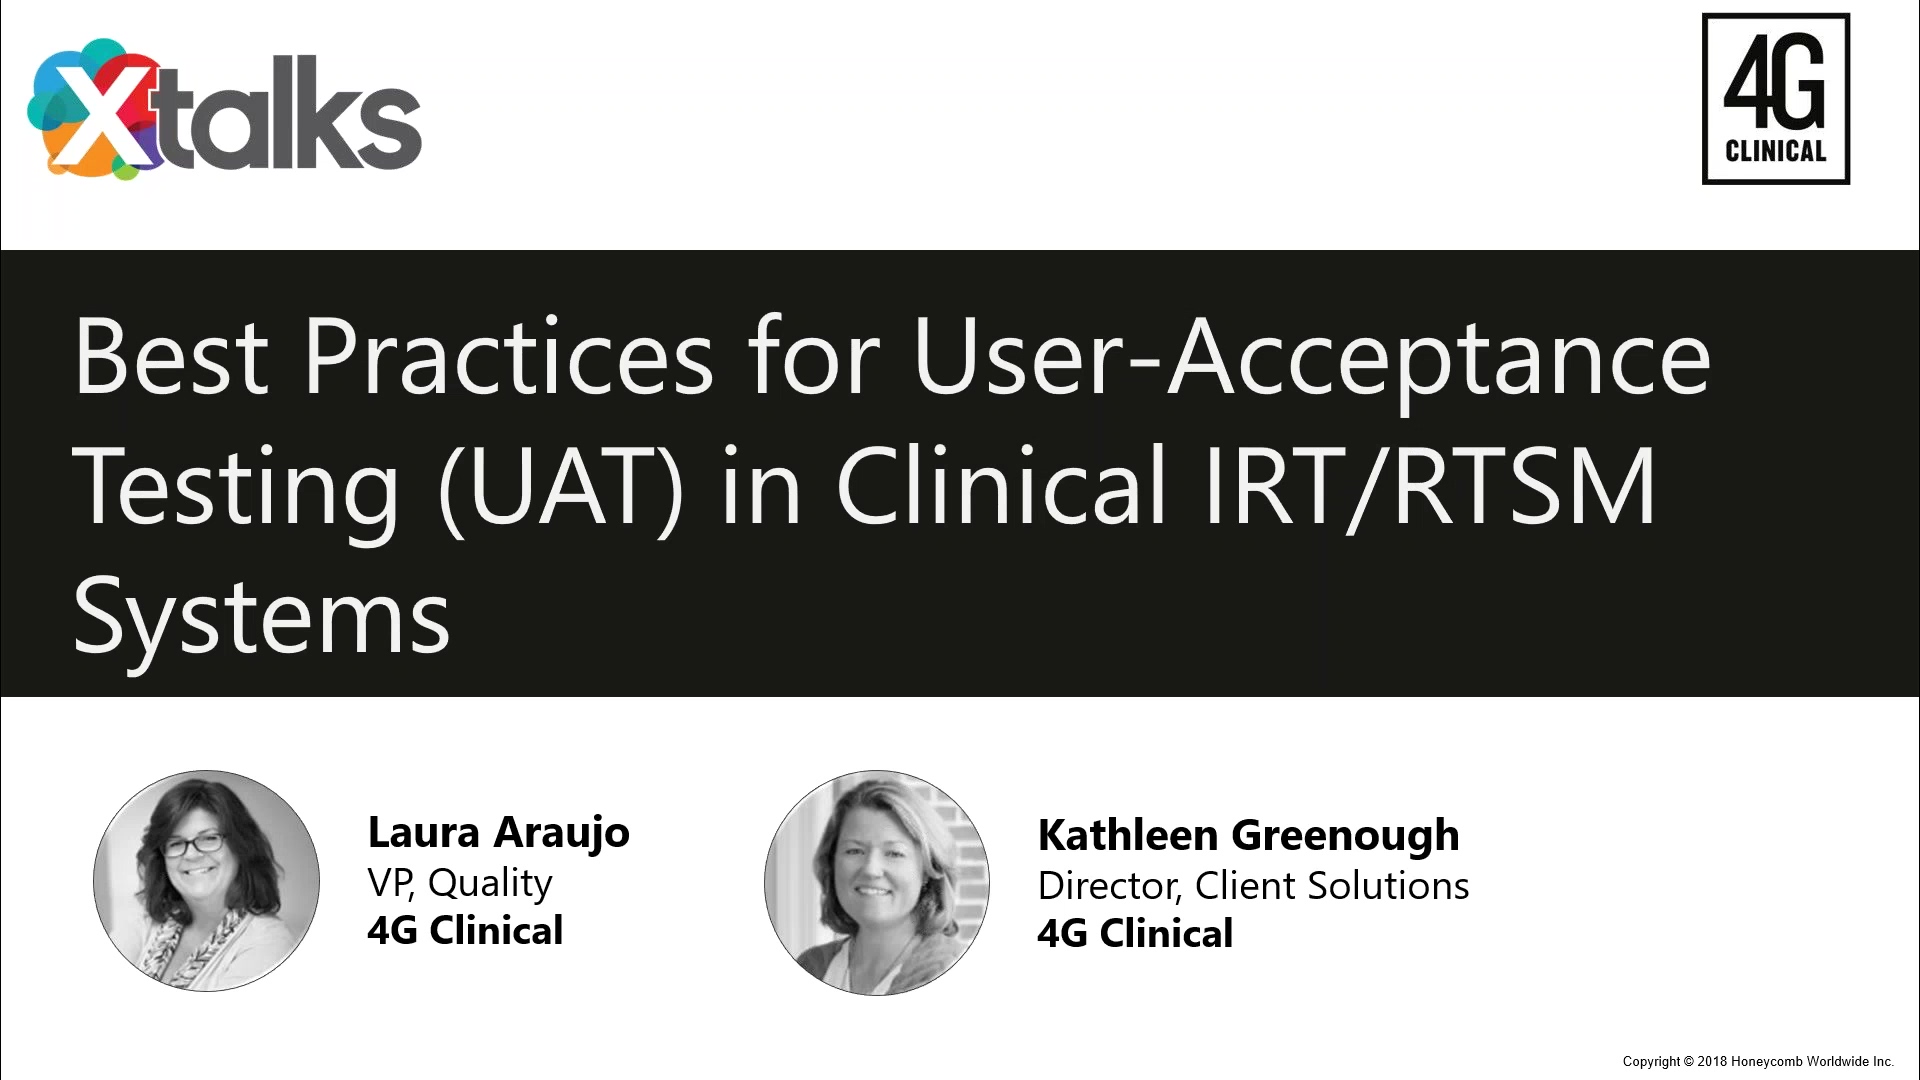 Best Practices for User-Acceptance Testing (UAT) in Clinical IRTRTSM Systems-thumb